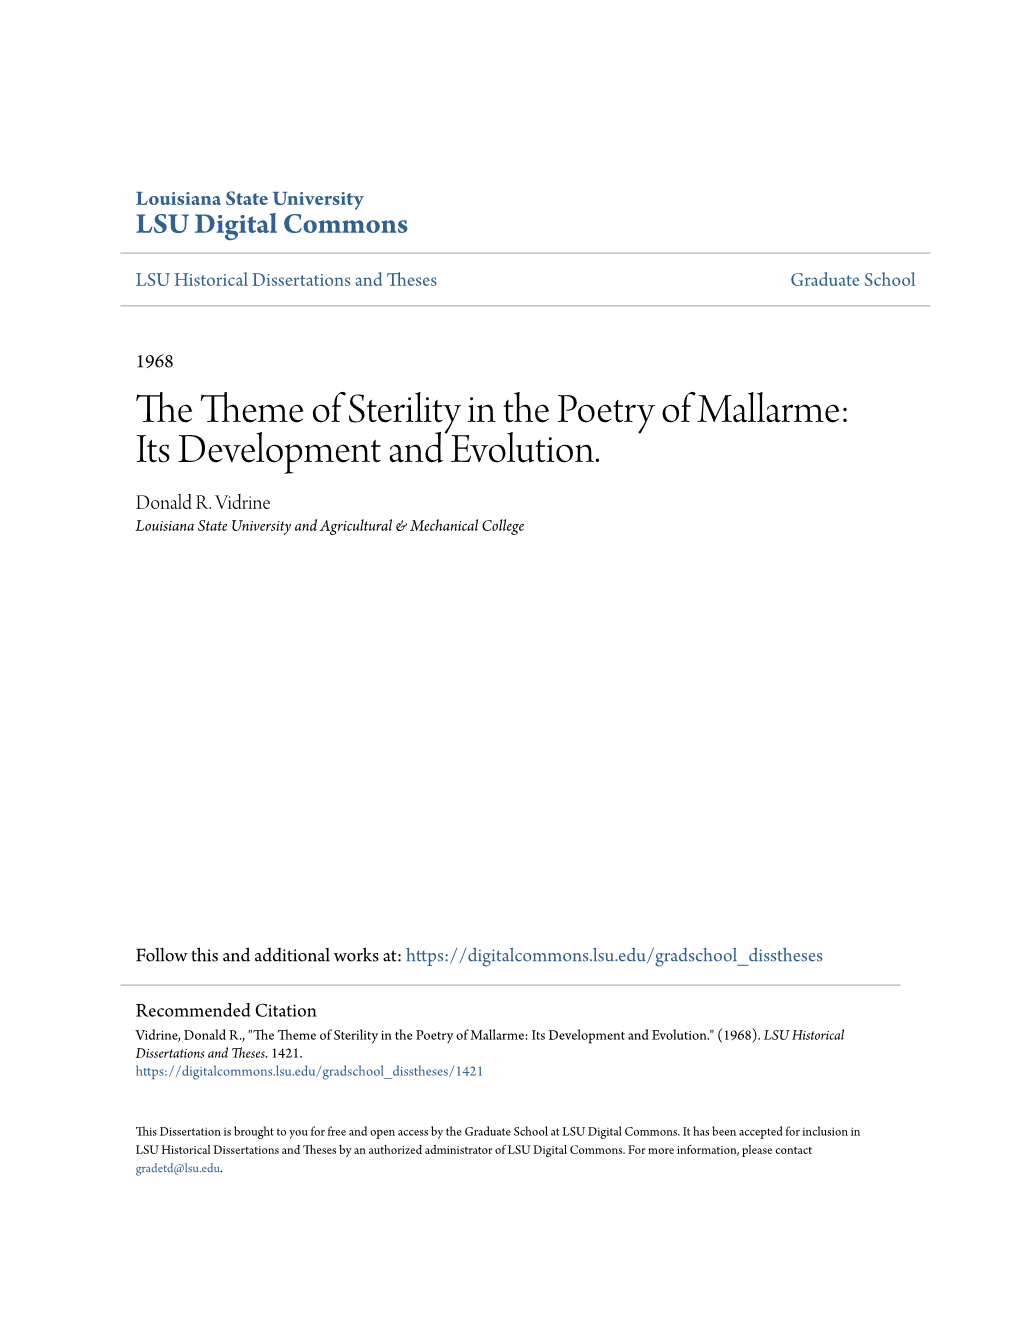 The Theme of Sterility in the Poetry of Mallarme: Its Development and Evolution